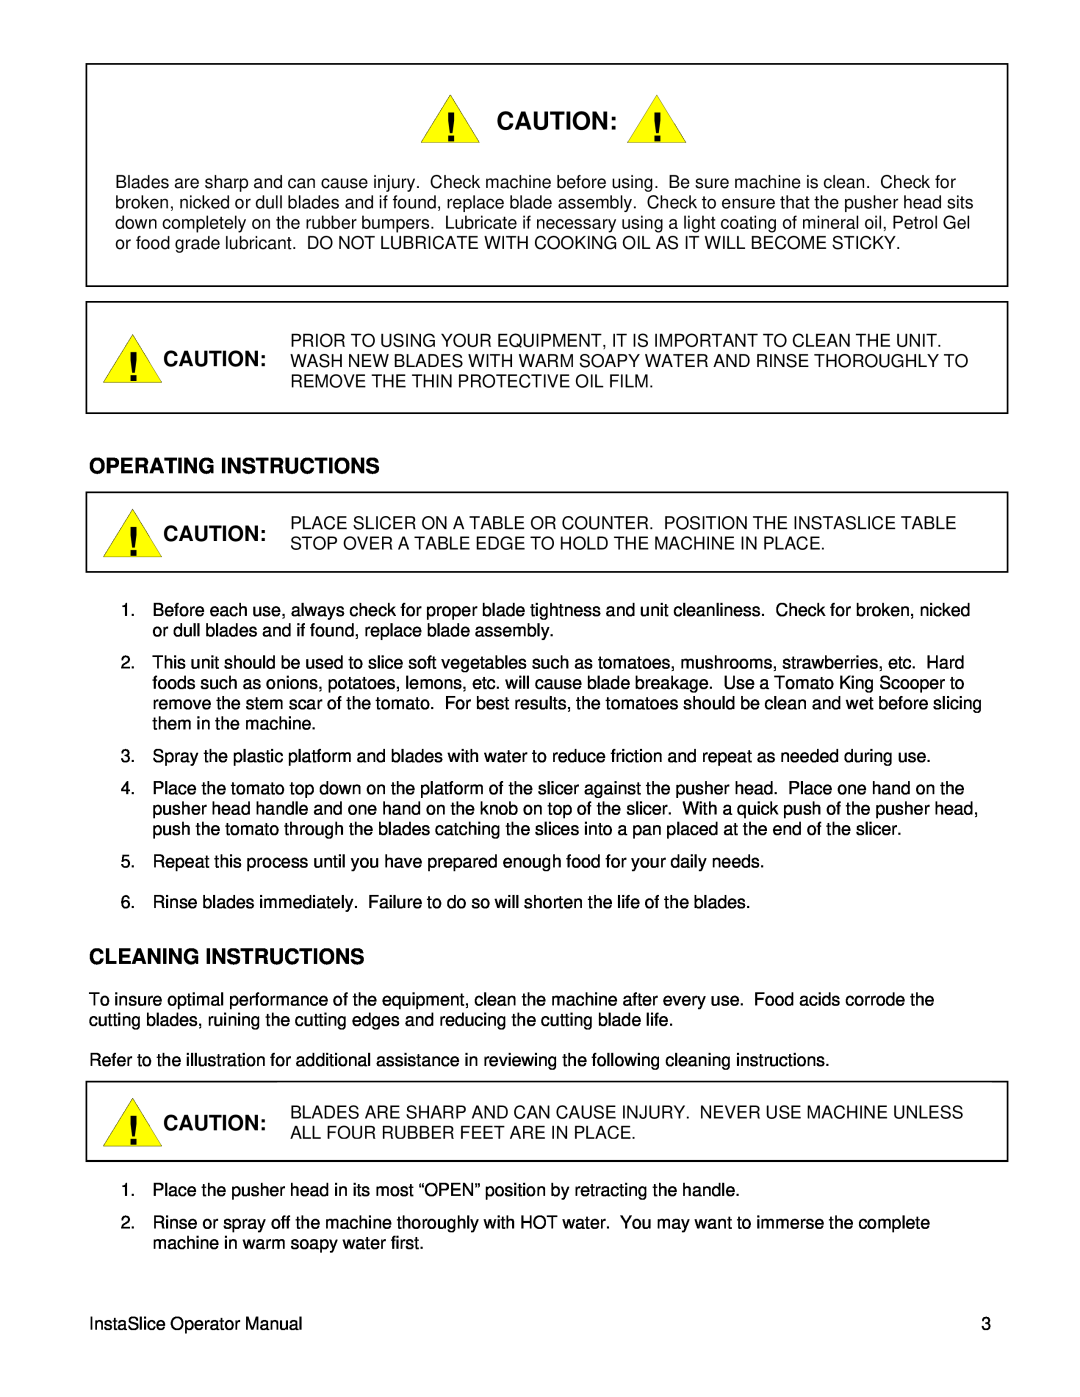 Lincoln 2806405 warranty Operating Instructions, Cleaning Instructions 